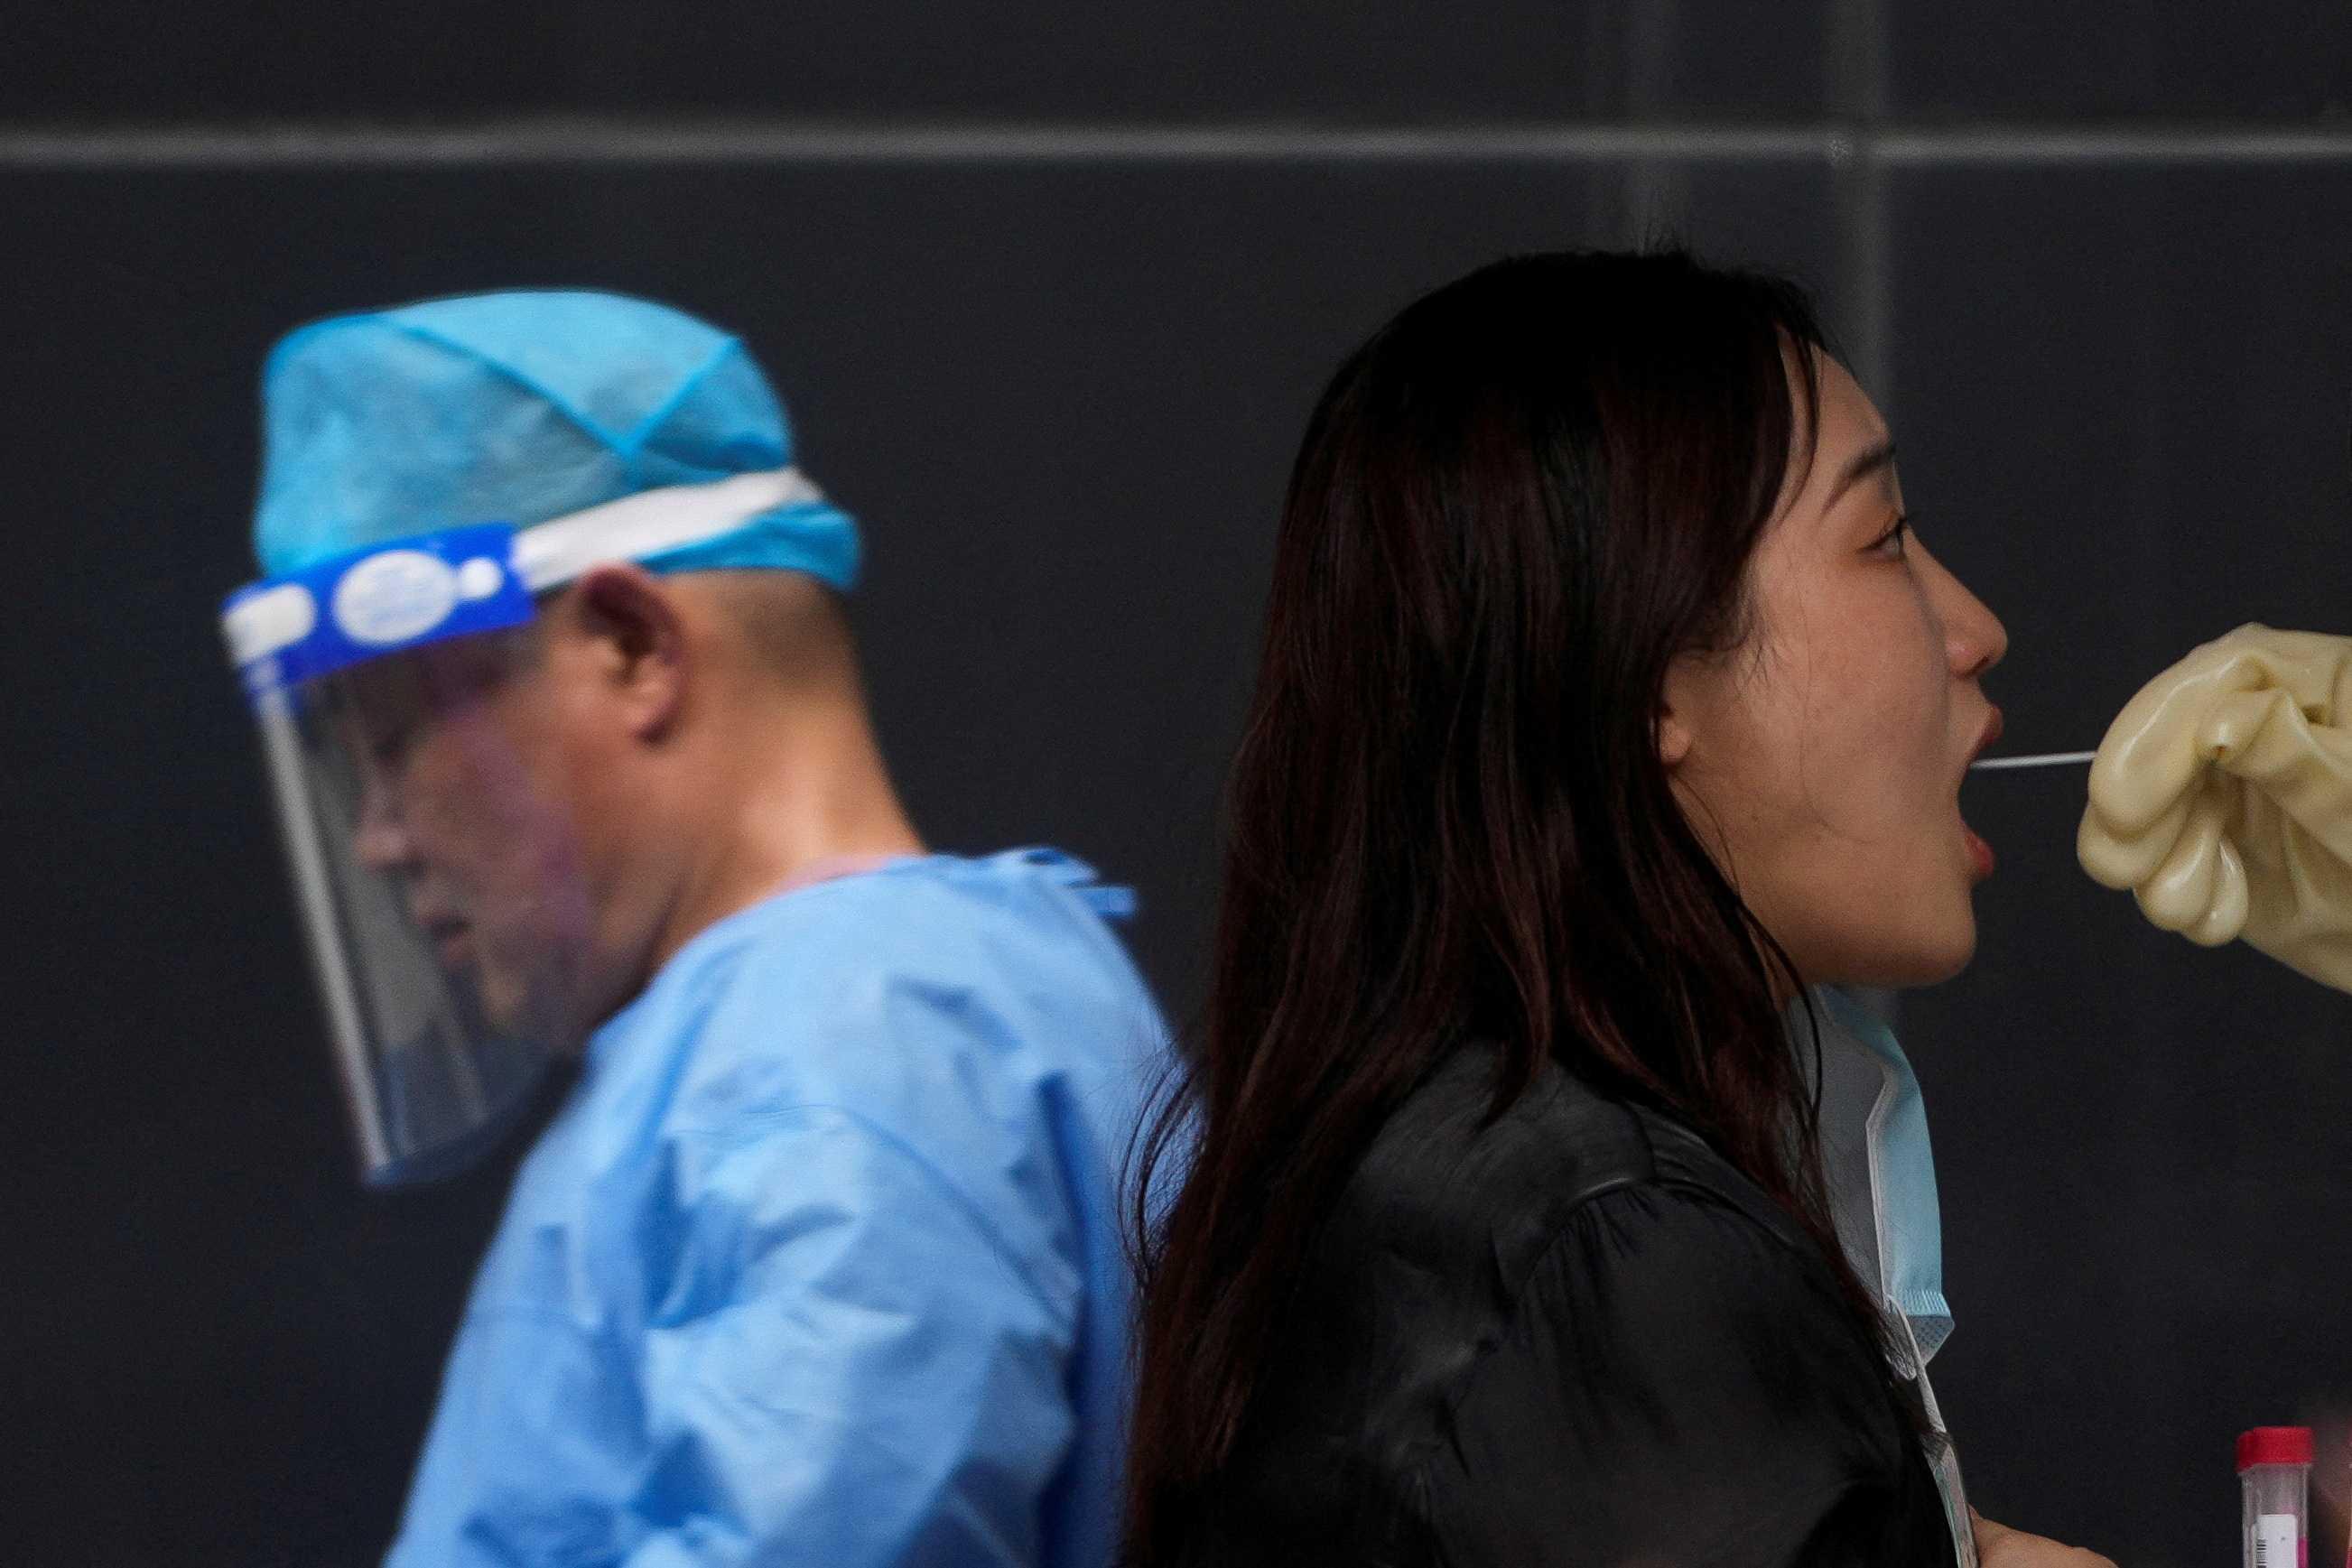 A woman gets tested for Covid-19 on a street, amid new lockdown measures in parts of the city to curb the Covid-19 outbreak in Shanghai, China July 11. Photo: Reuters